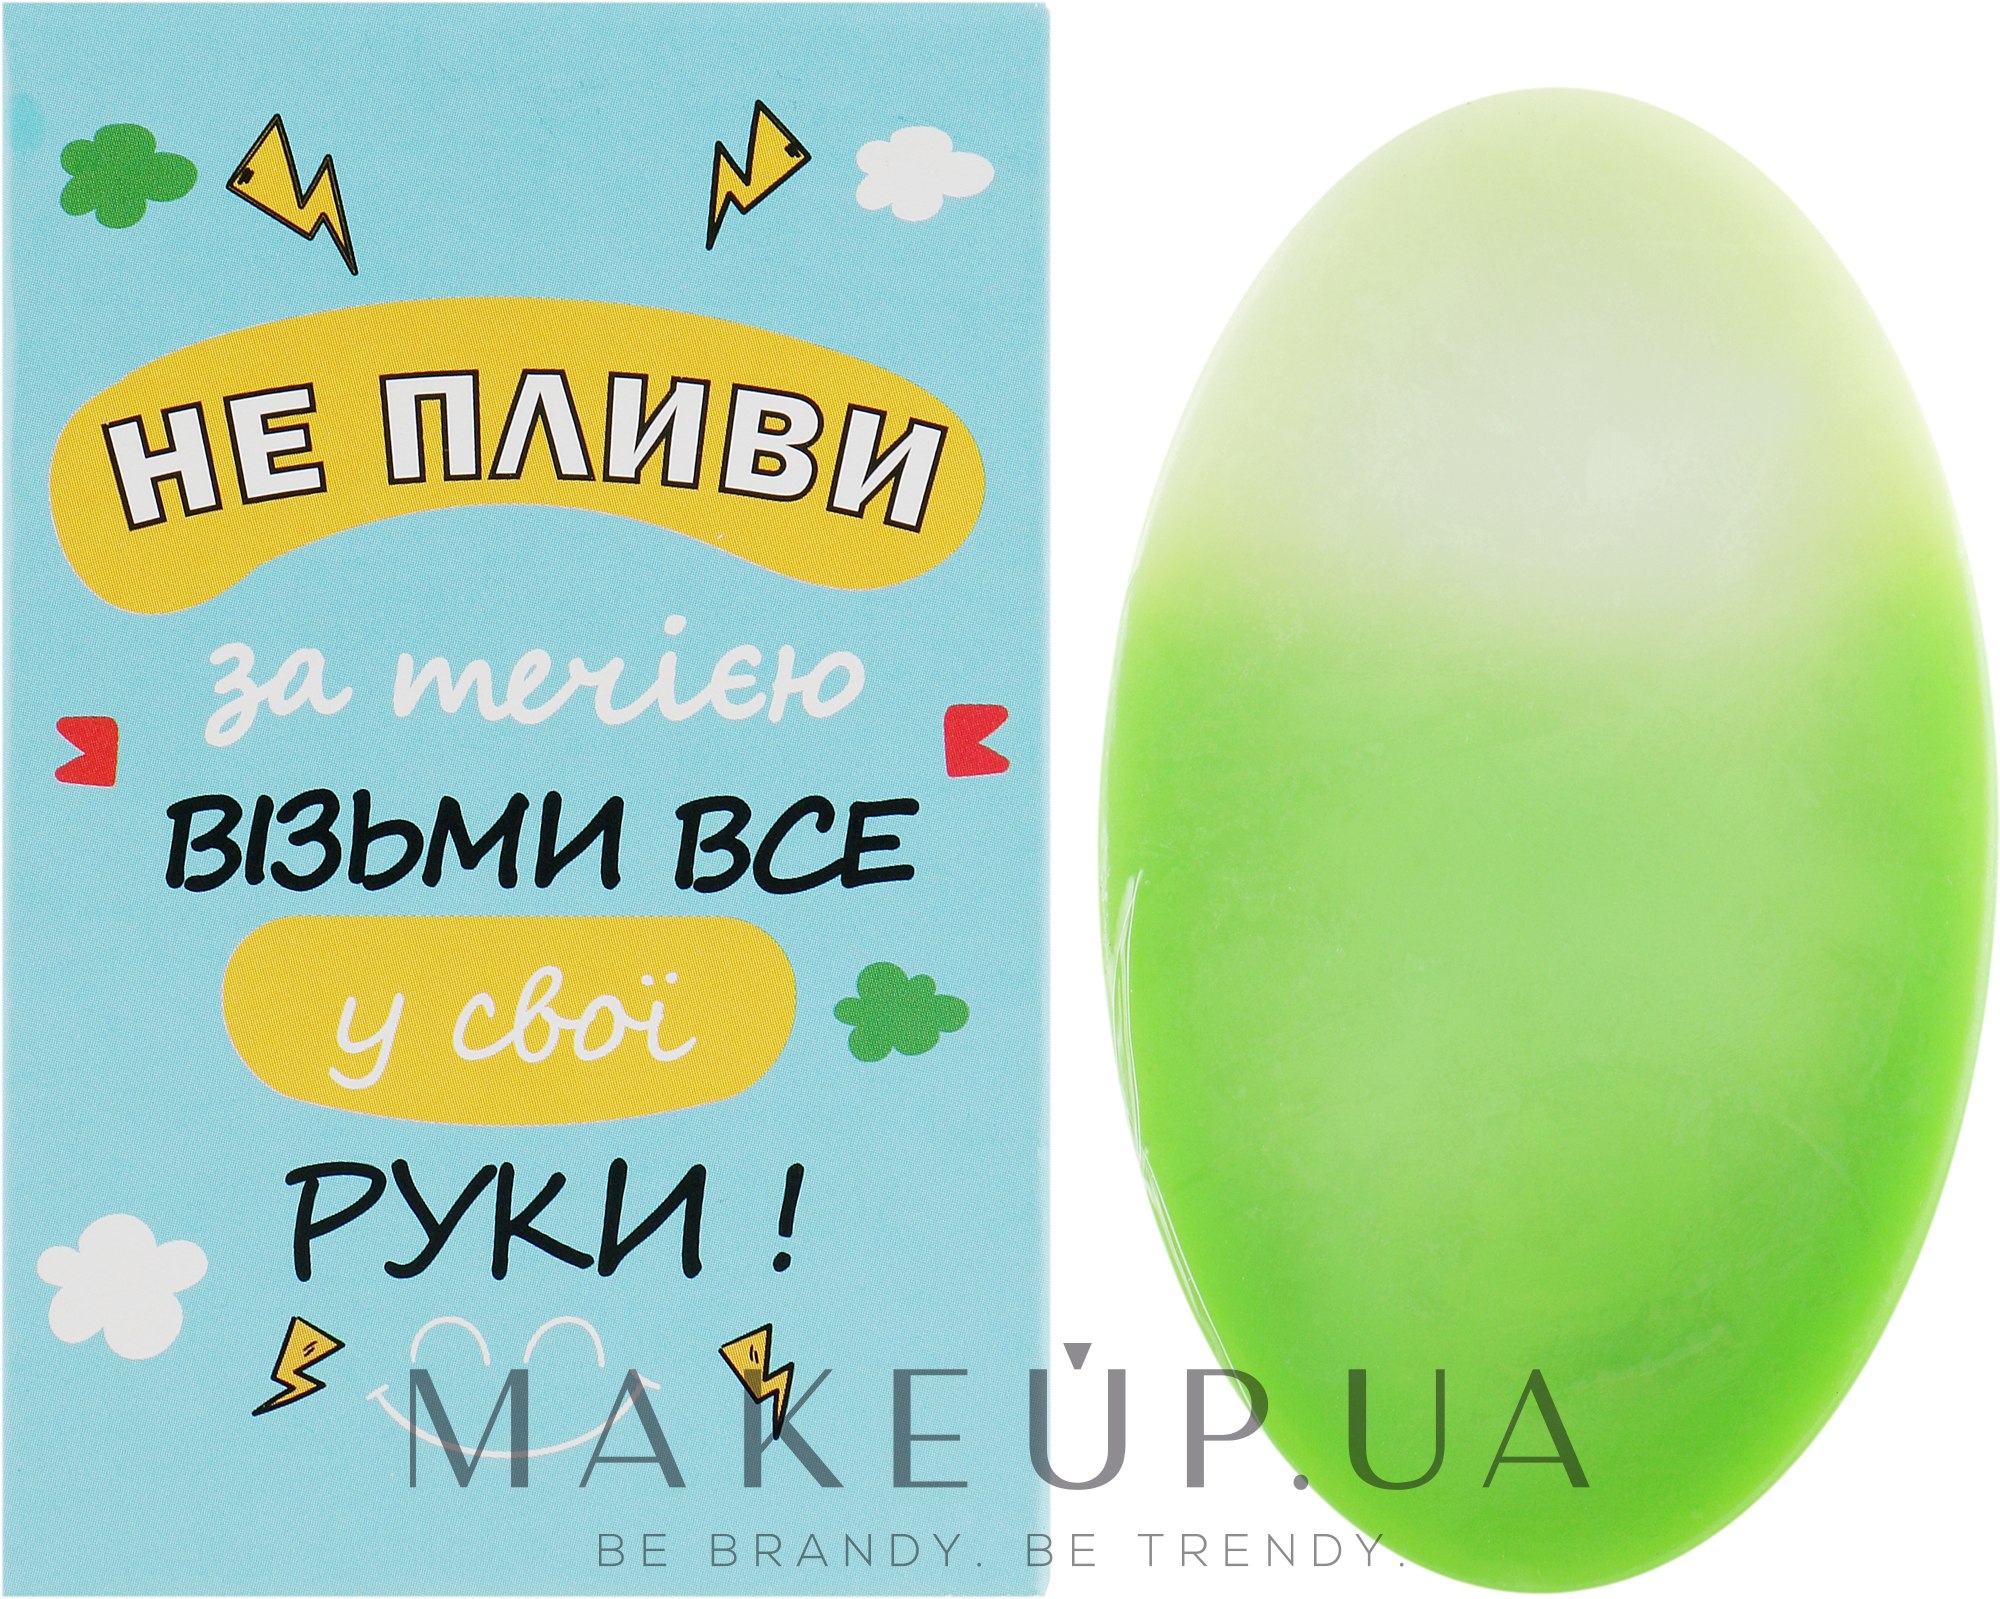 Soap "Wish" Don't Go with the Flow, Take Everything In Your Own Hands - Мильні історії — фото 90g